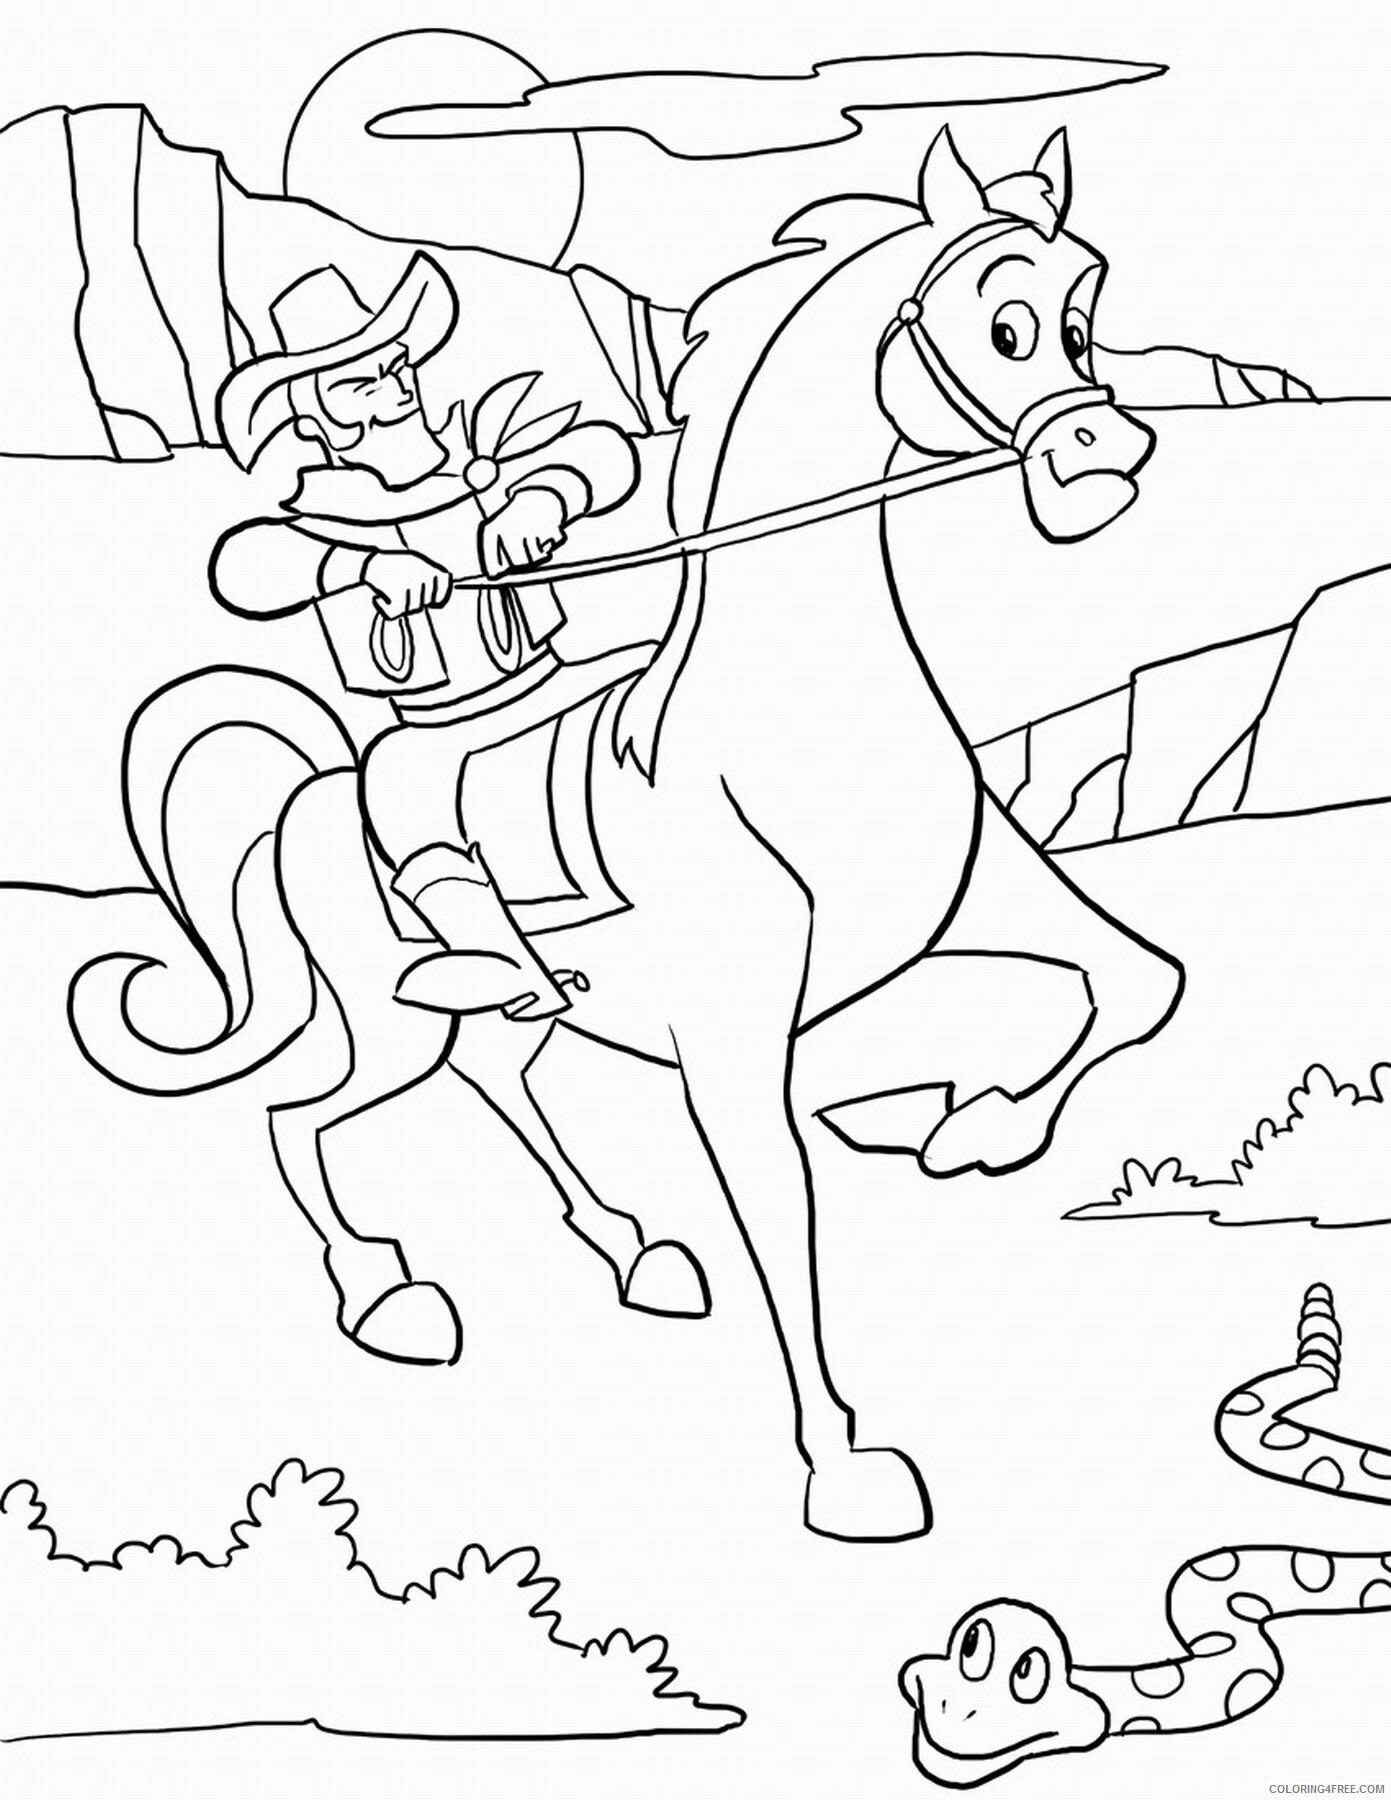 Cowboy Coloring Pages for boys cowboy_01 Printable 2020 0179 Coloring4free